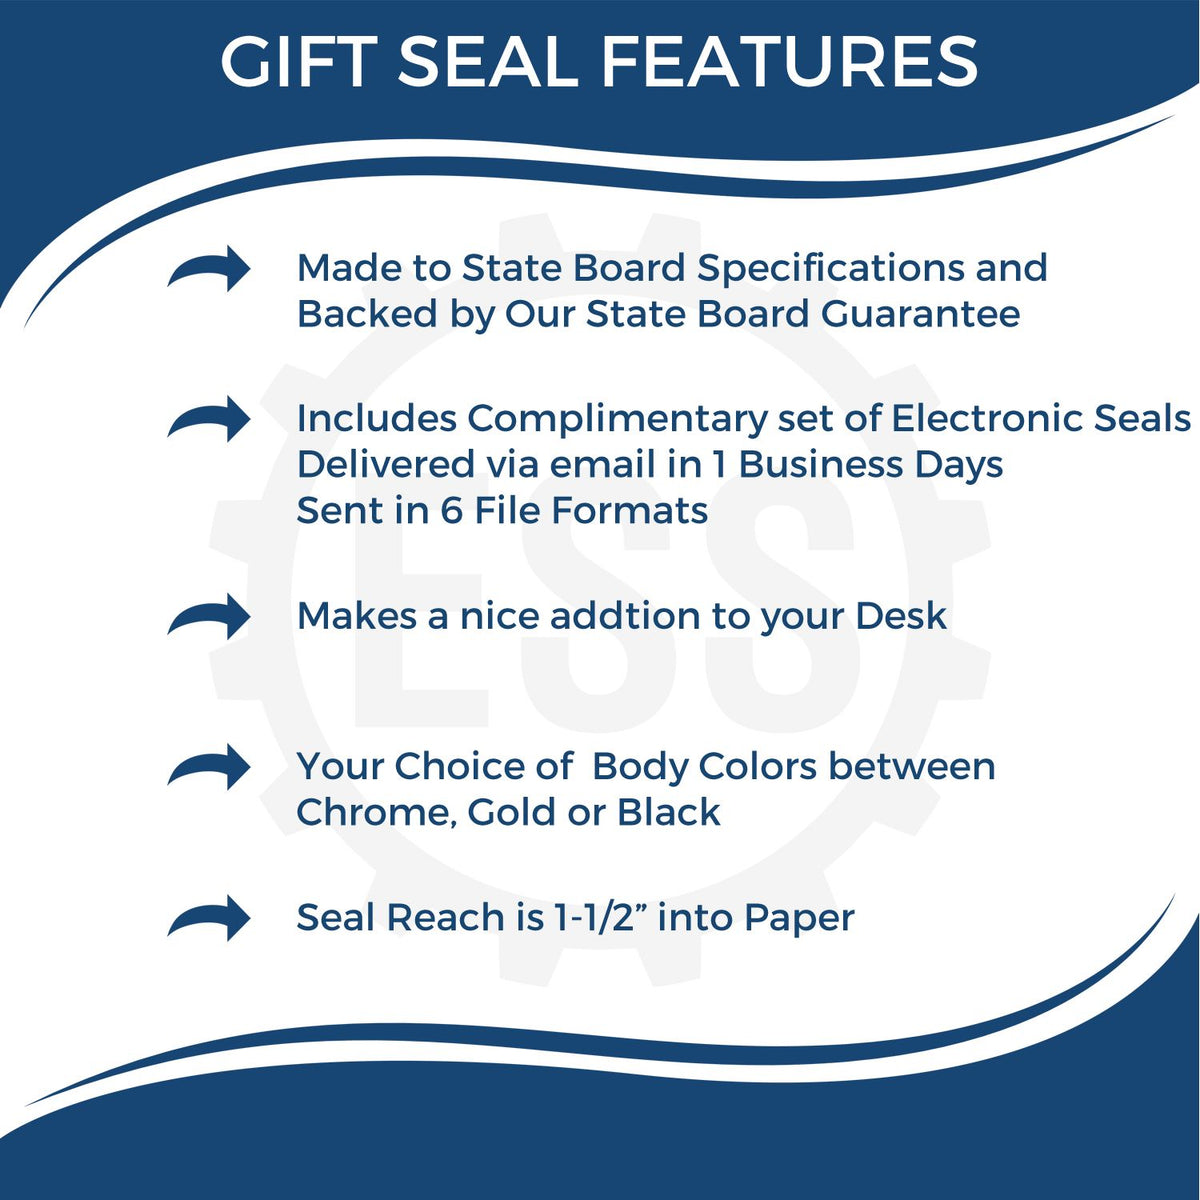 A picture of an infographic highlighting the selling points for the Gift Florida Engineer Seal